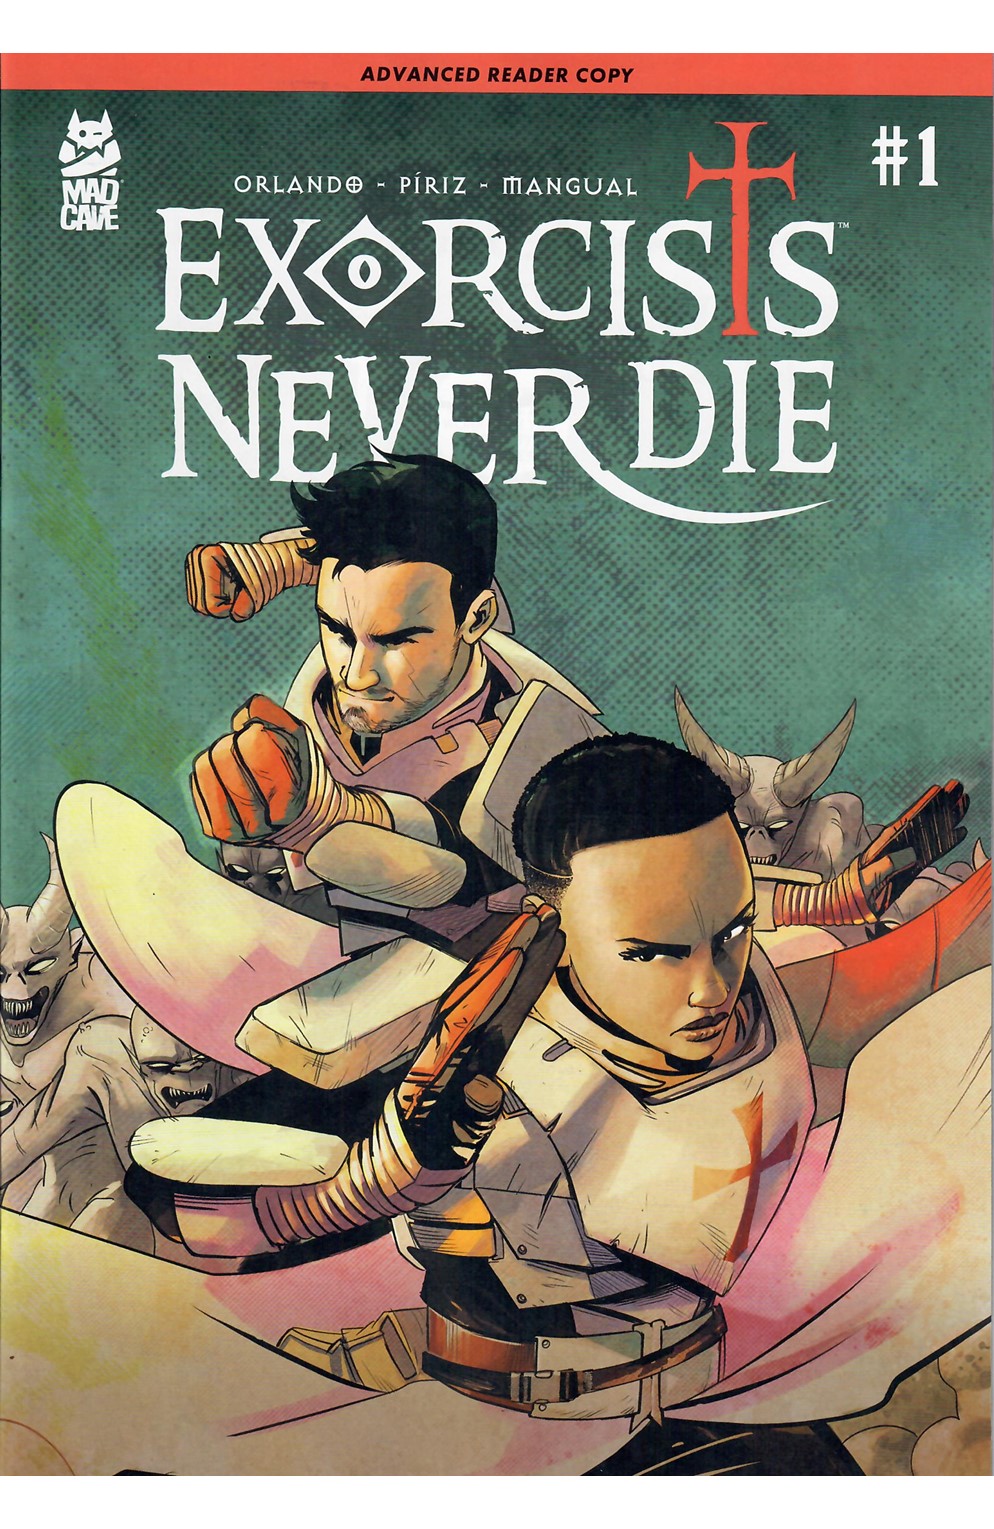 Exorcists Never Die #1 Advanced Reader Copy